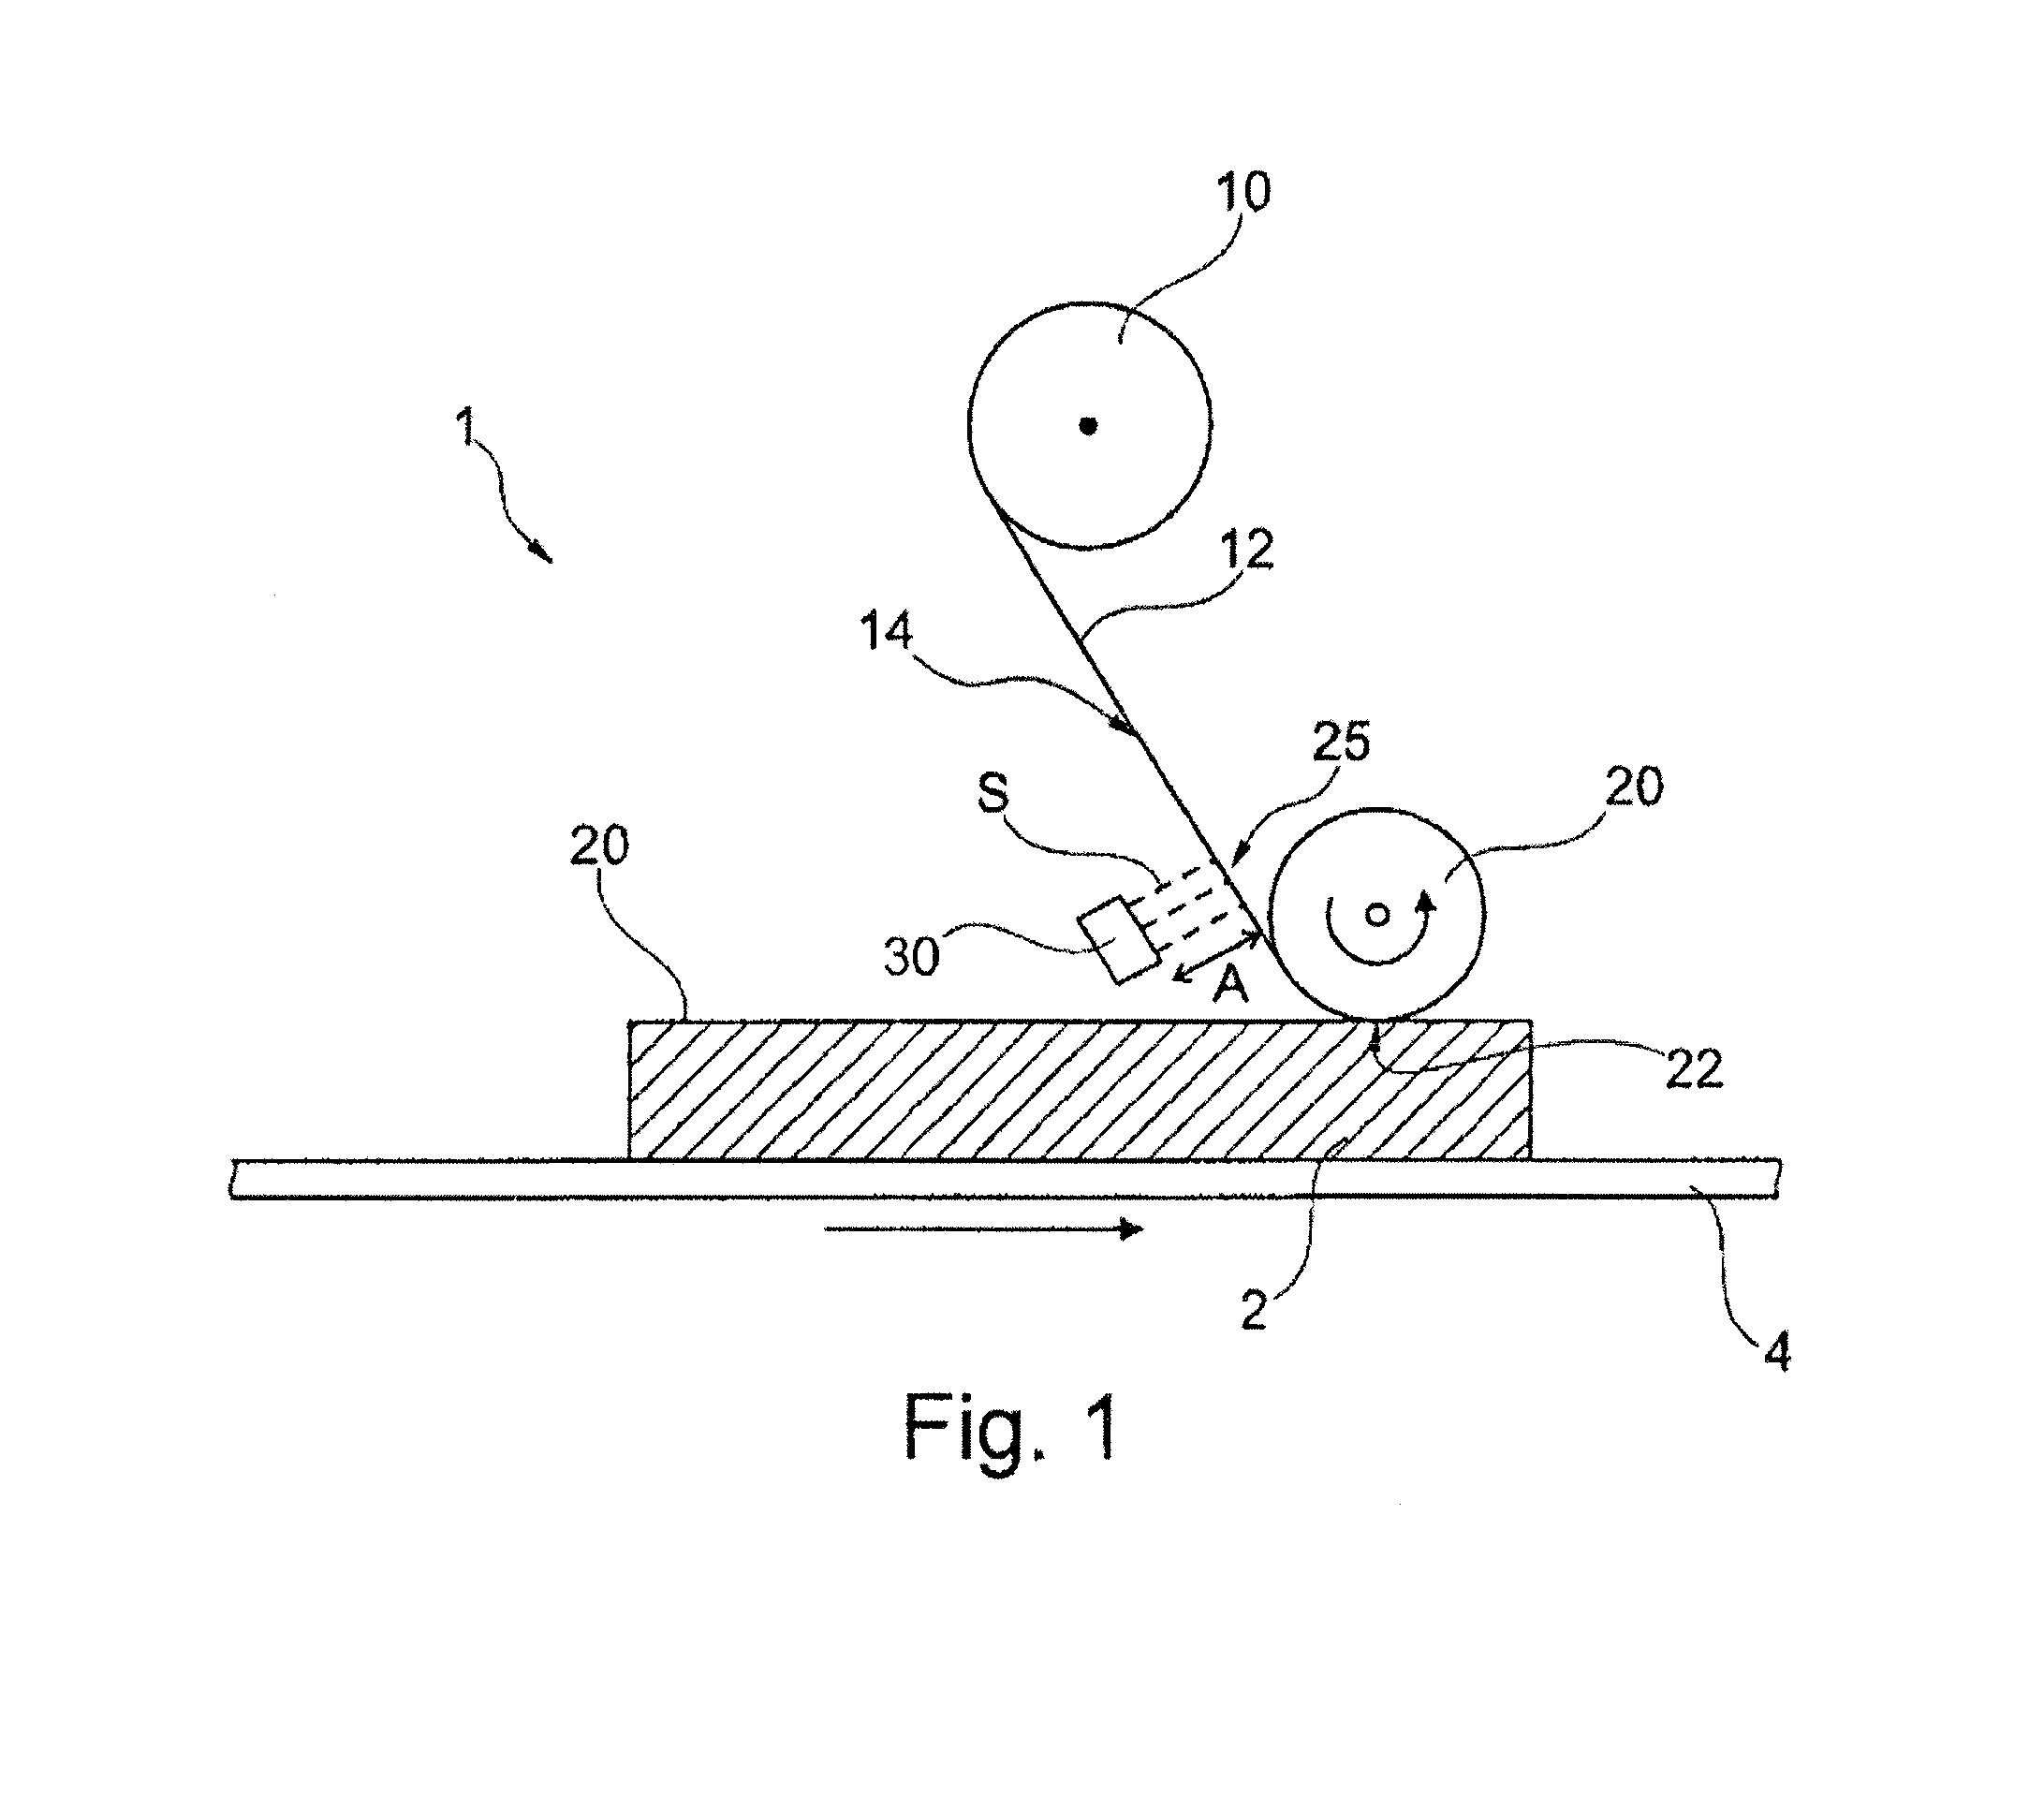 Method of applying a coating onto workpieces and device for coating workpieces